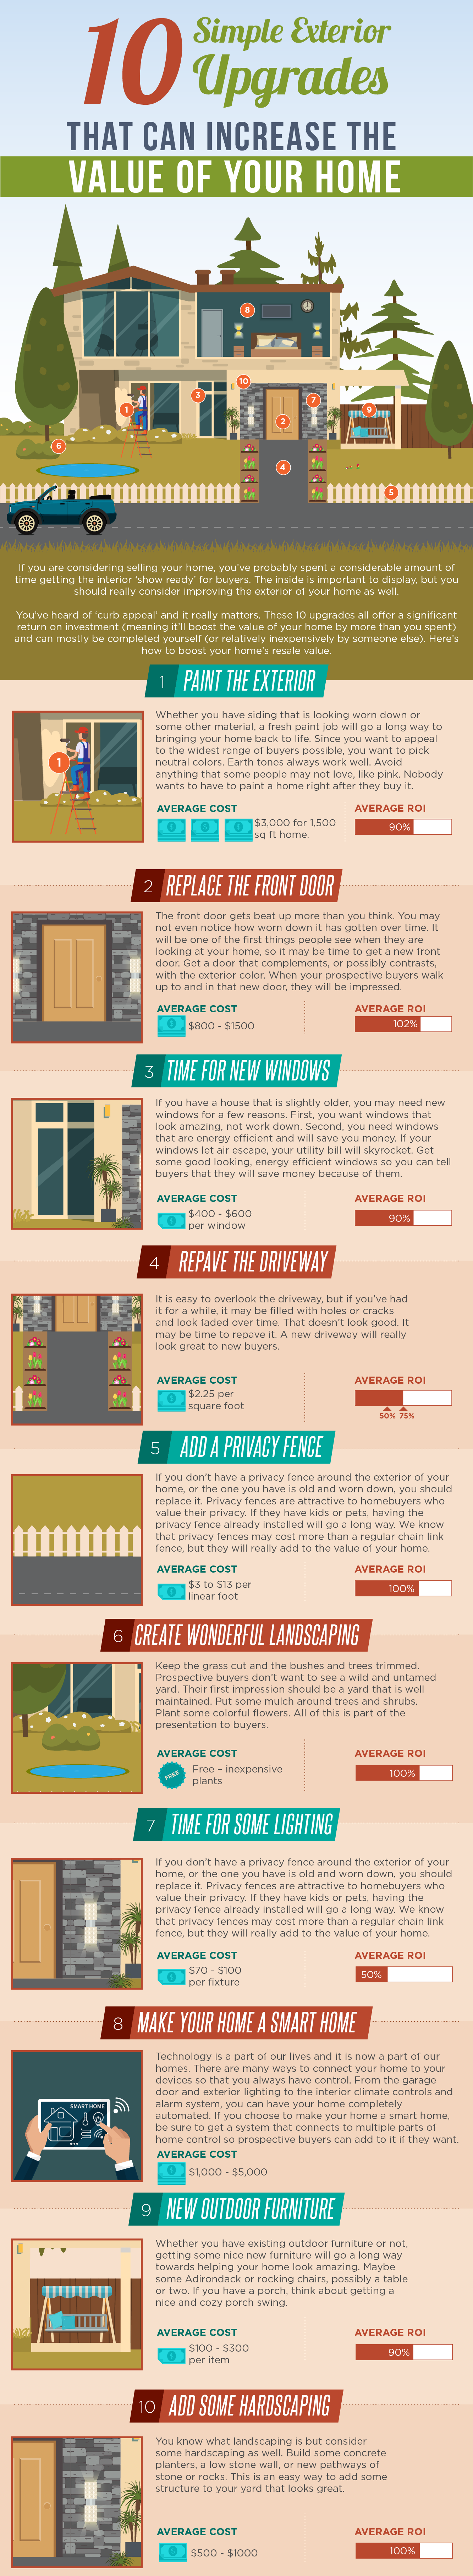 10 Simple Exterior Upgrades That Can Increase The Value of Your Home